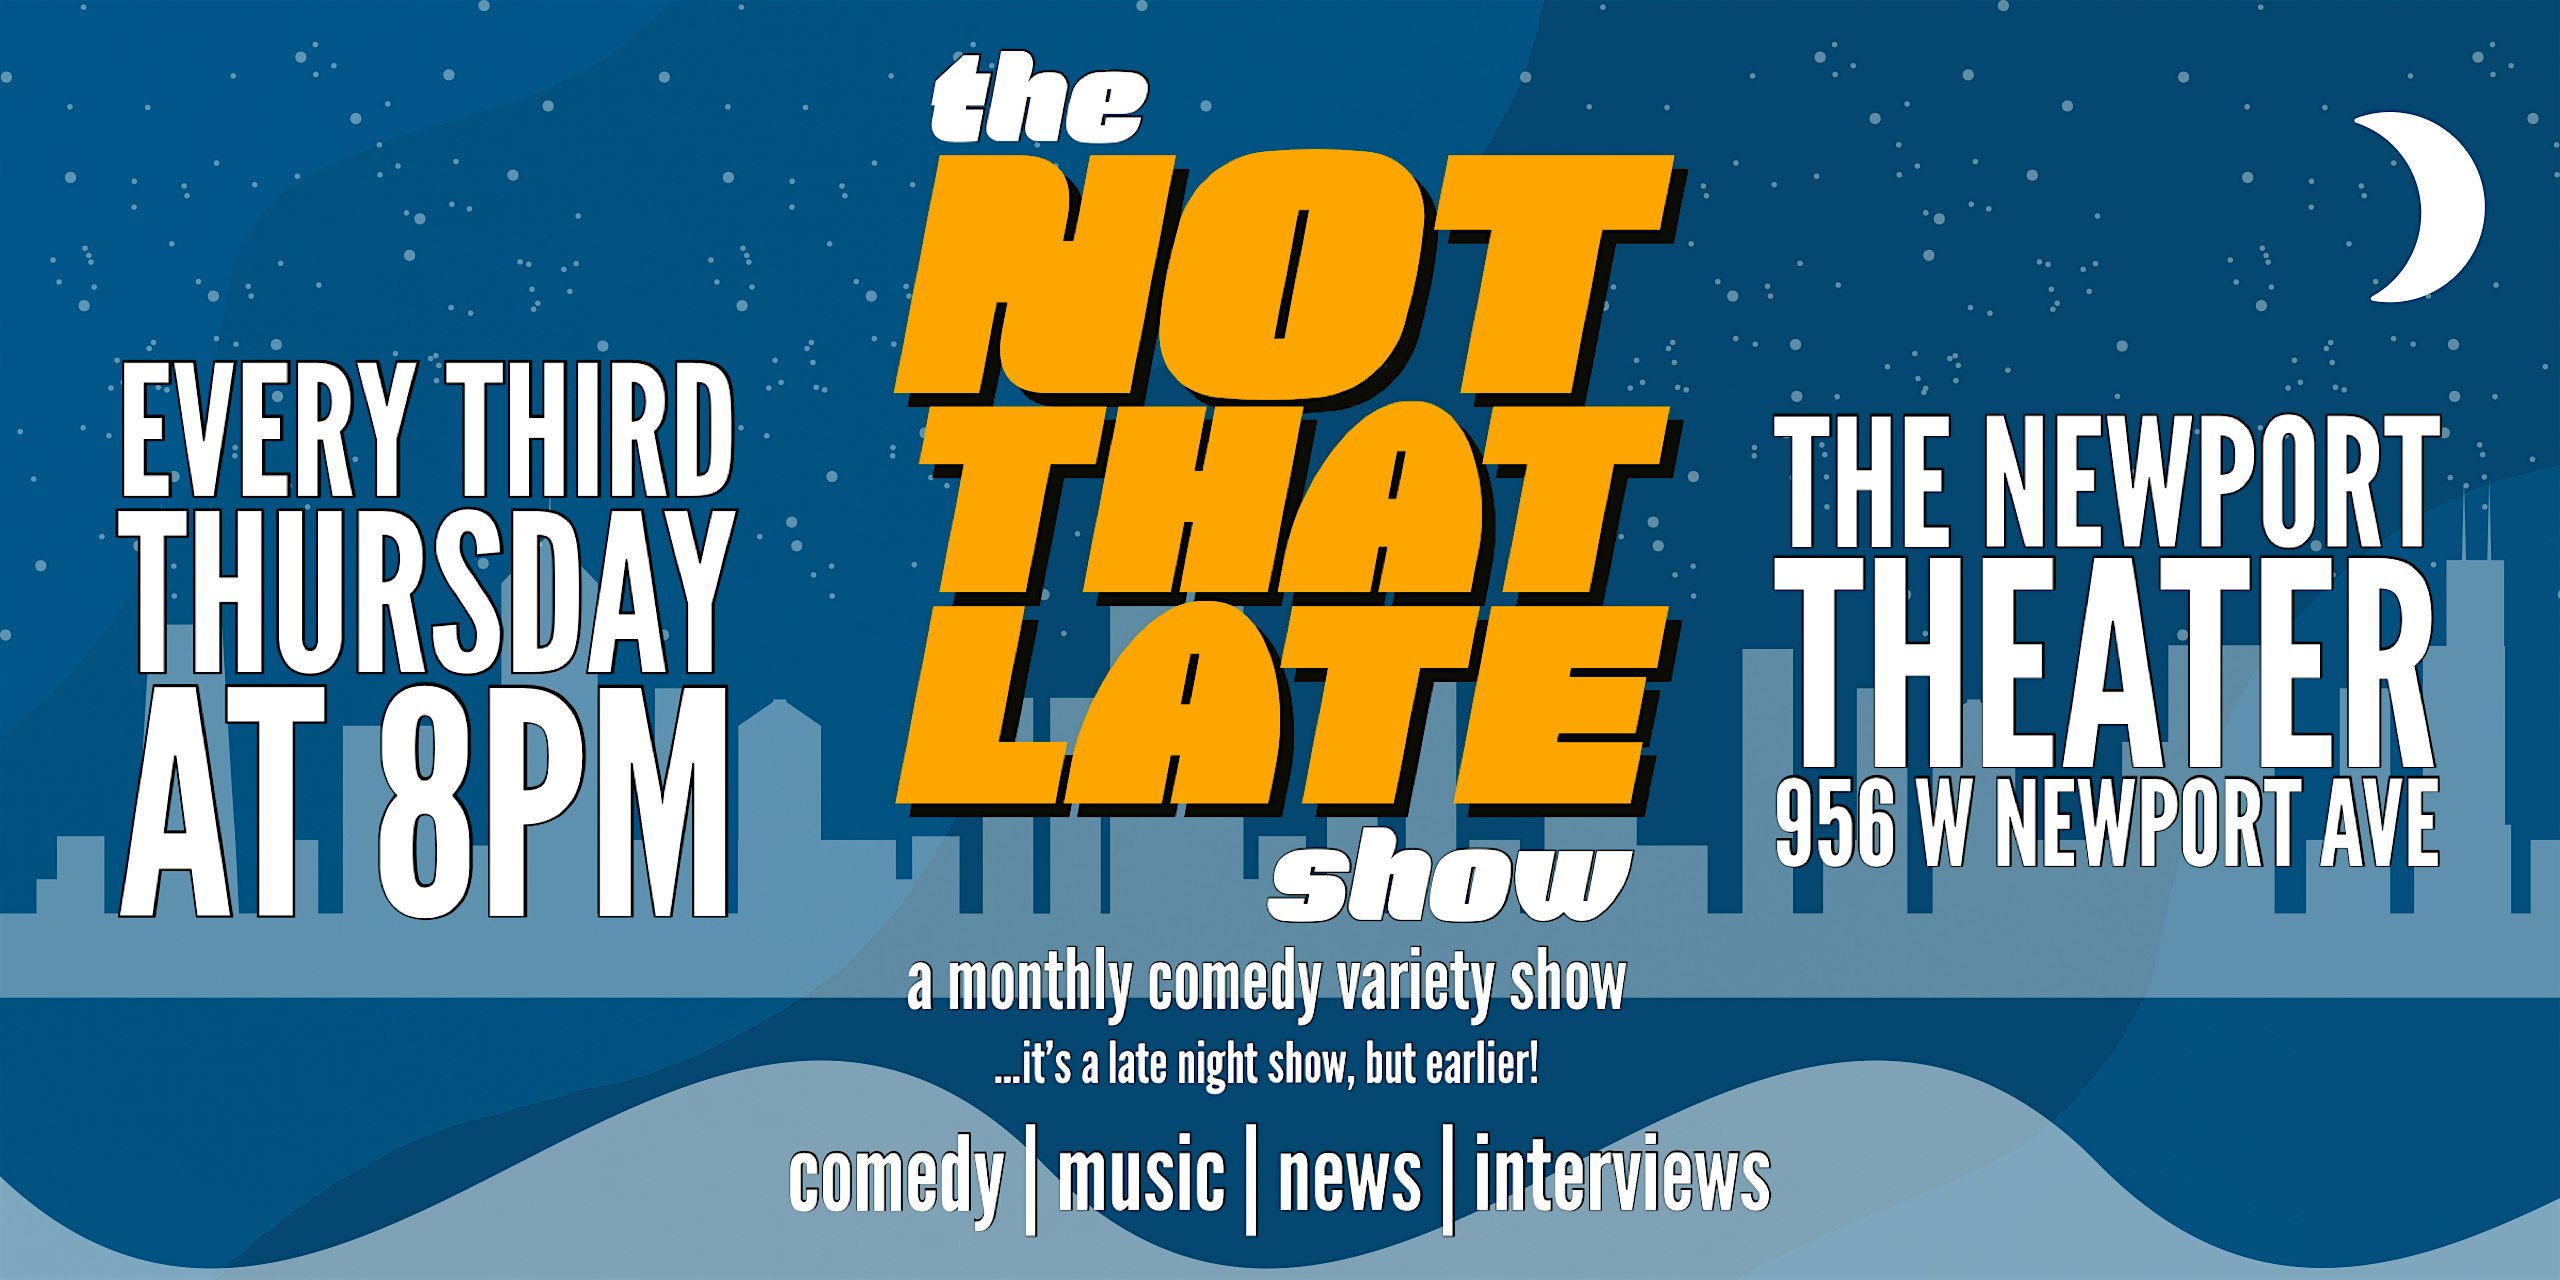 The Not That Late Show: A Monthly Variety Talk Show